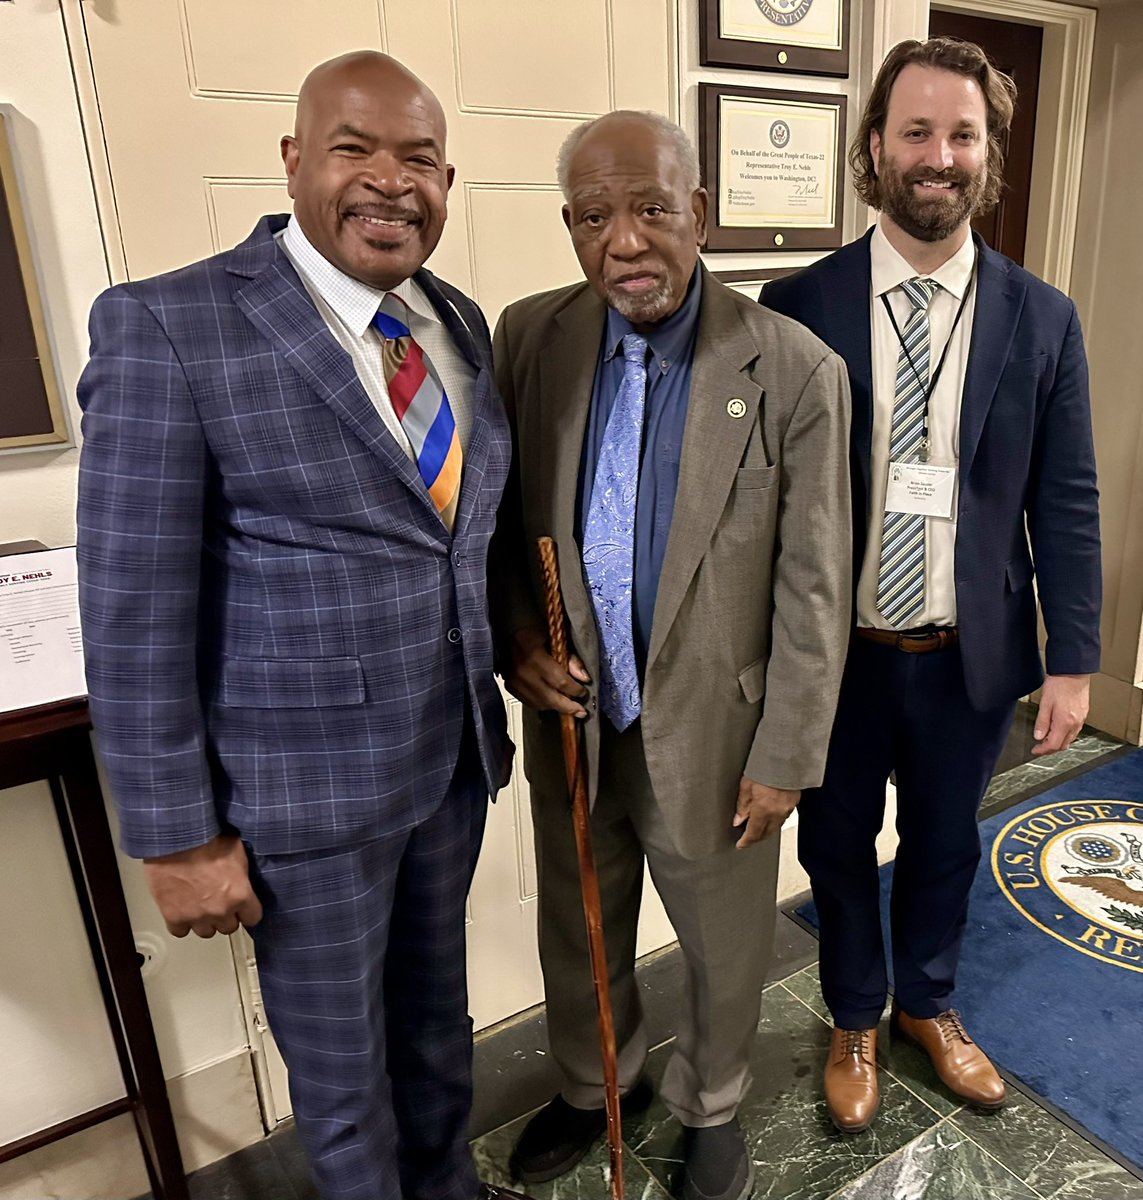 Thank you @RepDannyDavis for your support of climate justice. @faithinplace @StylishRev #Faiths4Climate #IPLConference24